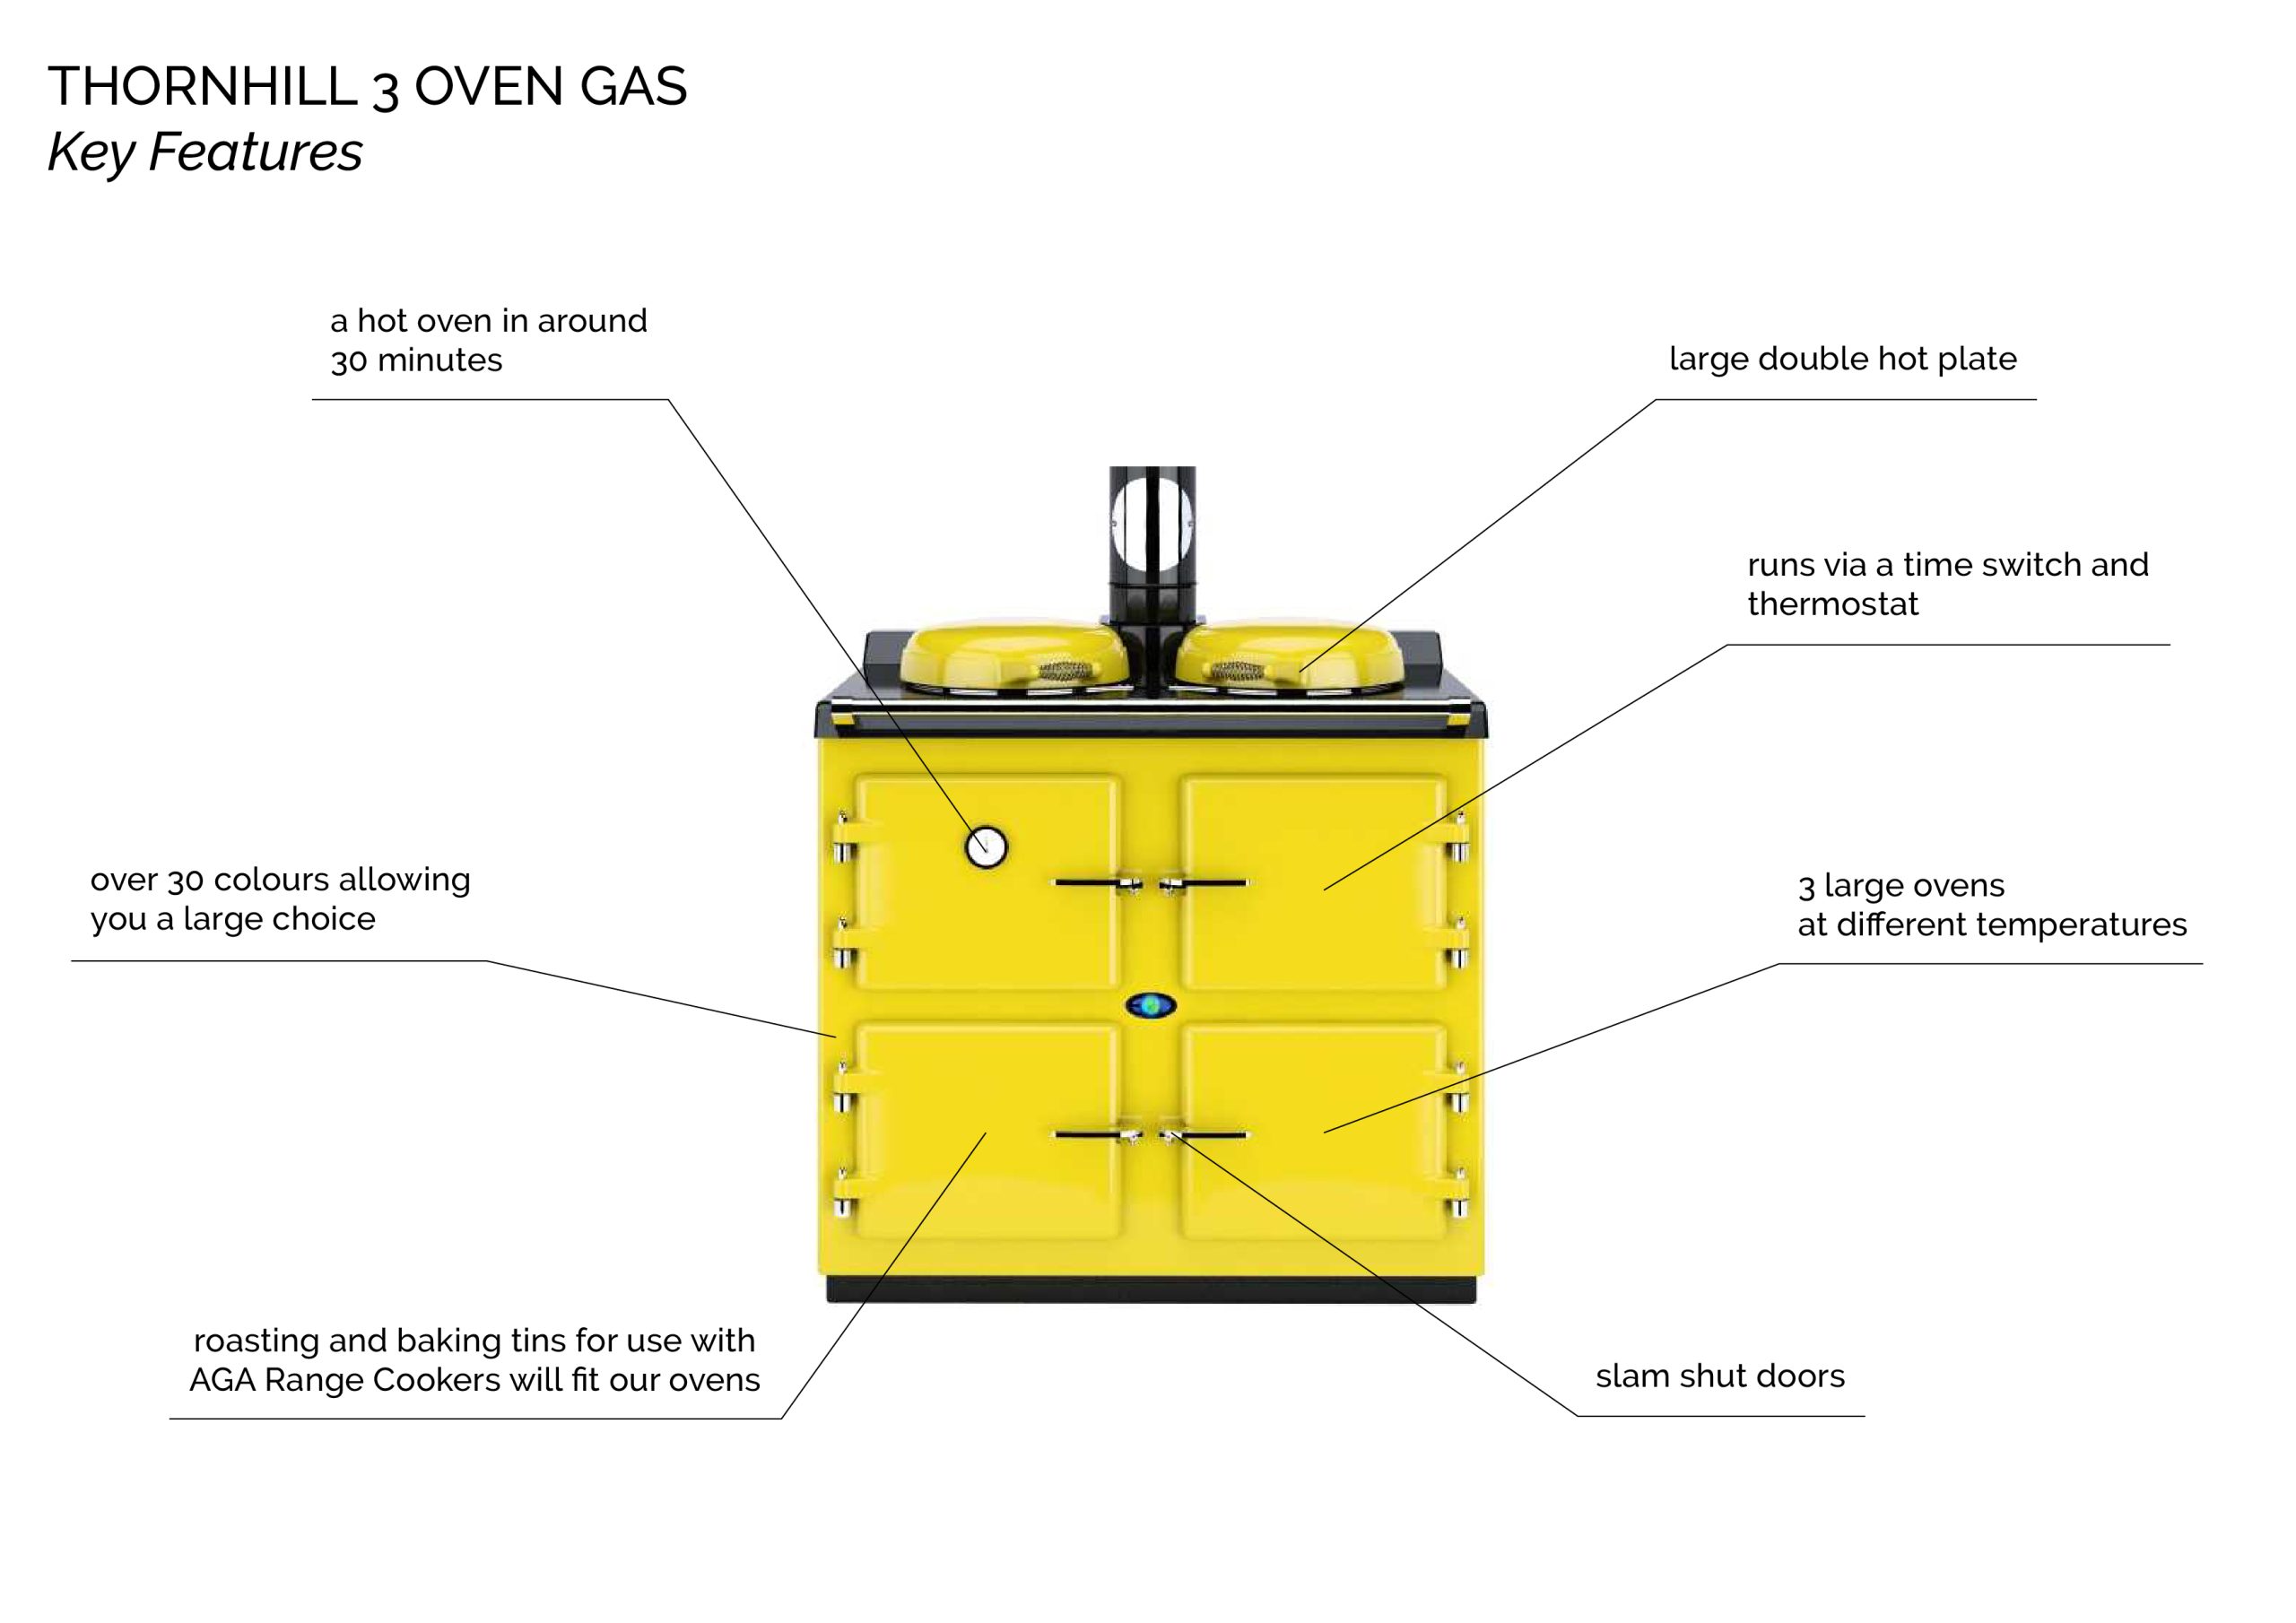 https://thornhillrangecookers.co.uk/wp-content/uploads/2020/04/thornhill-3-oven-gas-diagram-scaled.jpg